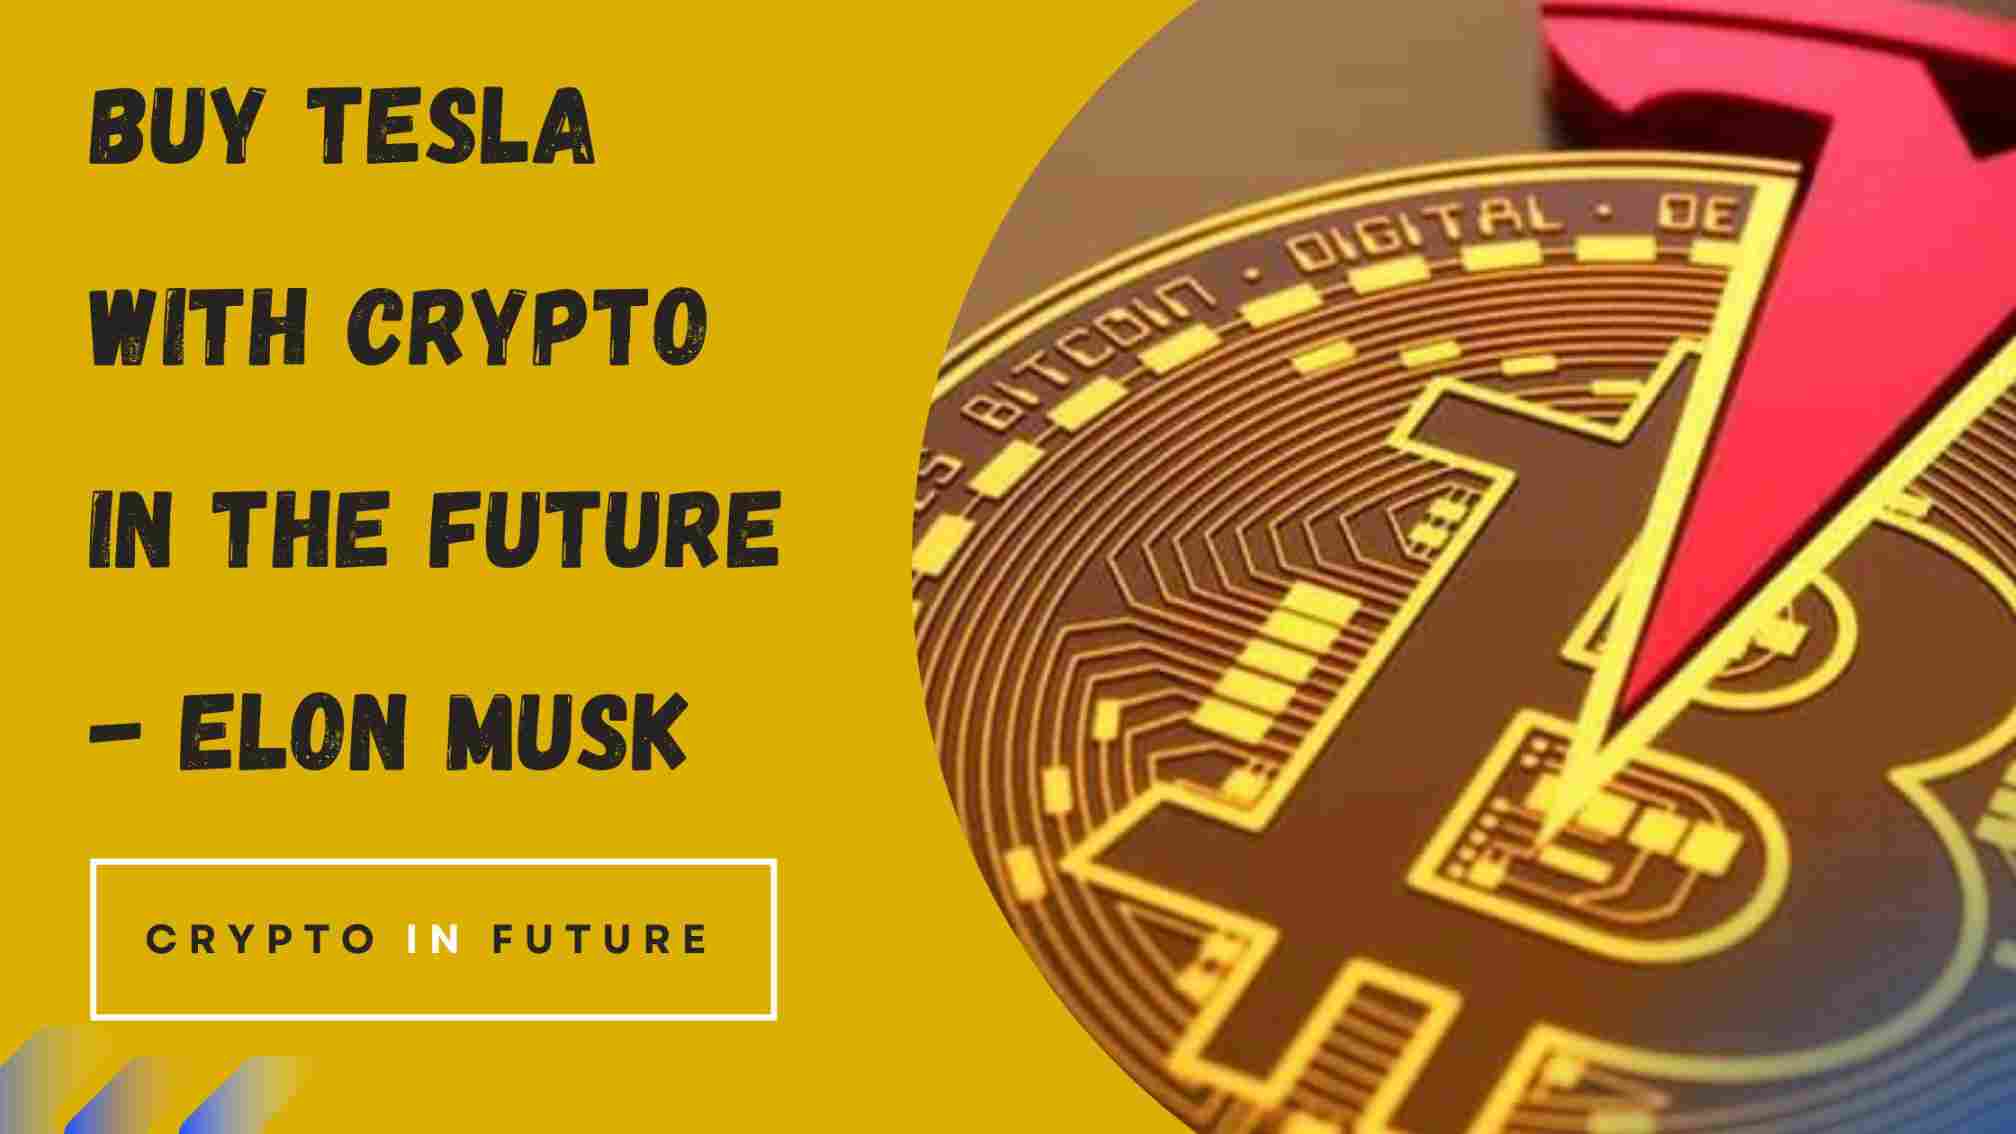 Buy Tesla With Crypto In The future - Elon Musk